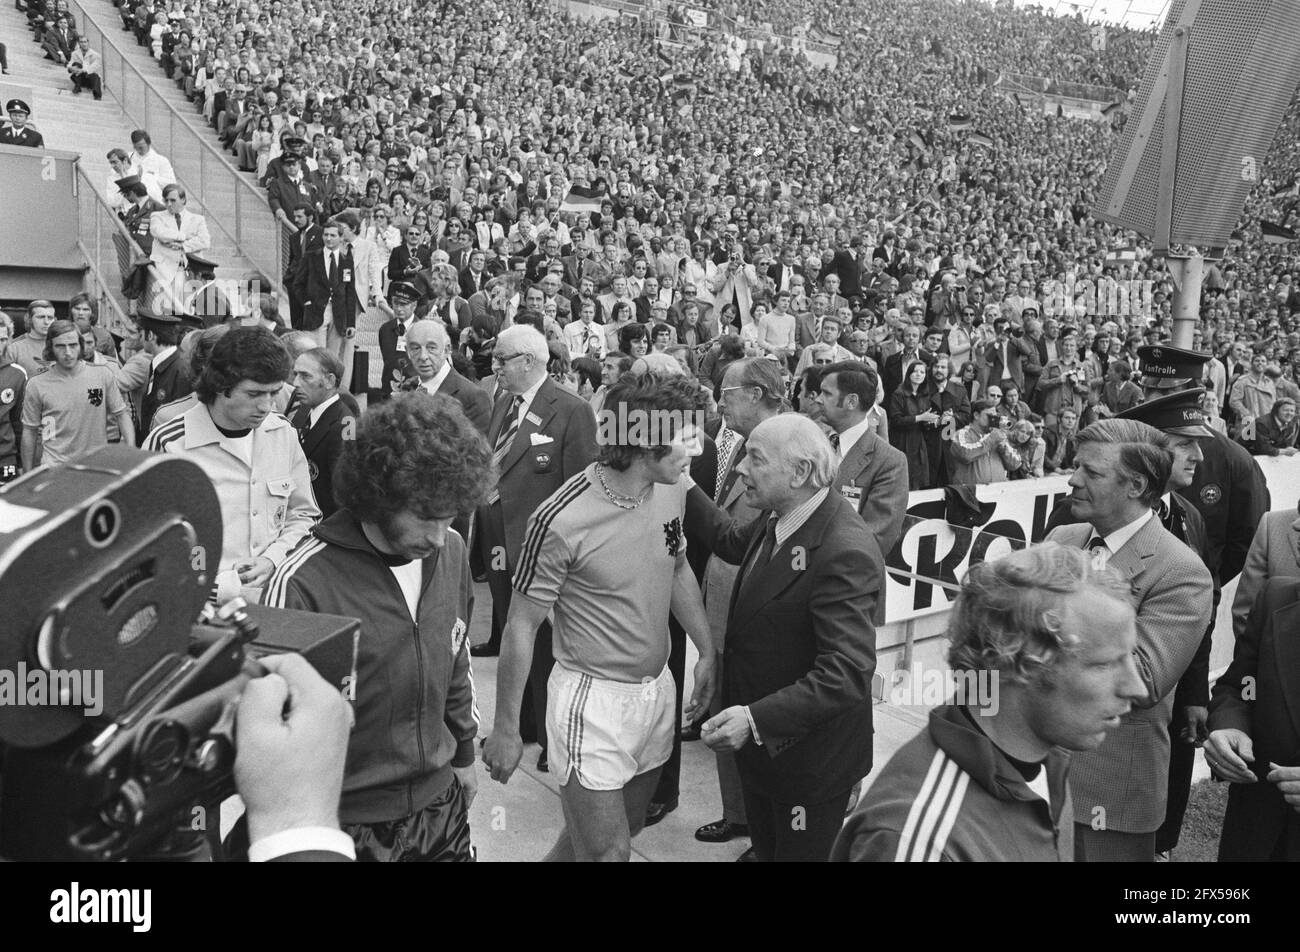 World Cup final 1974 in Munich, West Germany v Netherlands 2-1; players enter the field, July 7, 1974, finals, sports, soccer, world championships, The Netherlands, 20th century press agency photo, news to remember, documentary, historic photography 1945-1990, visual stories, human history of the Twentieth Century, capturing moments in time Stock Photo